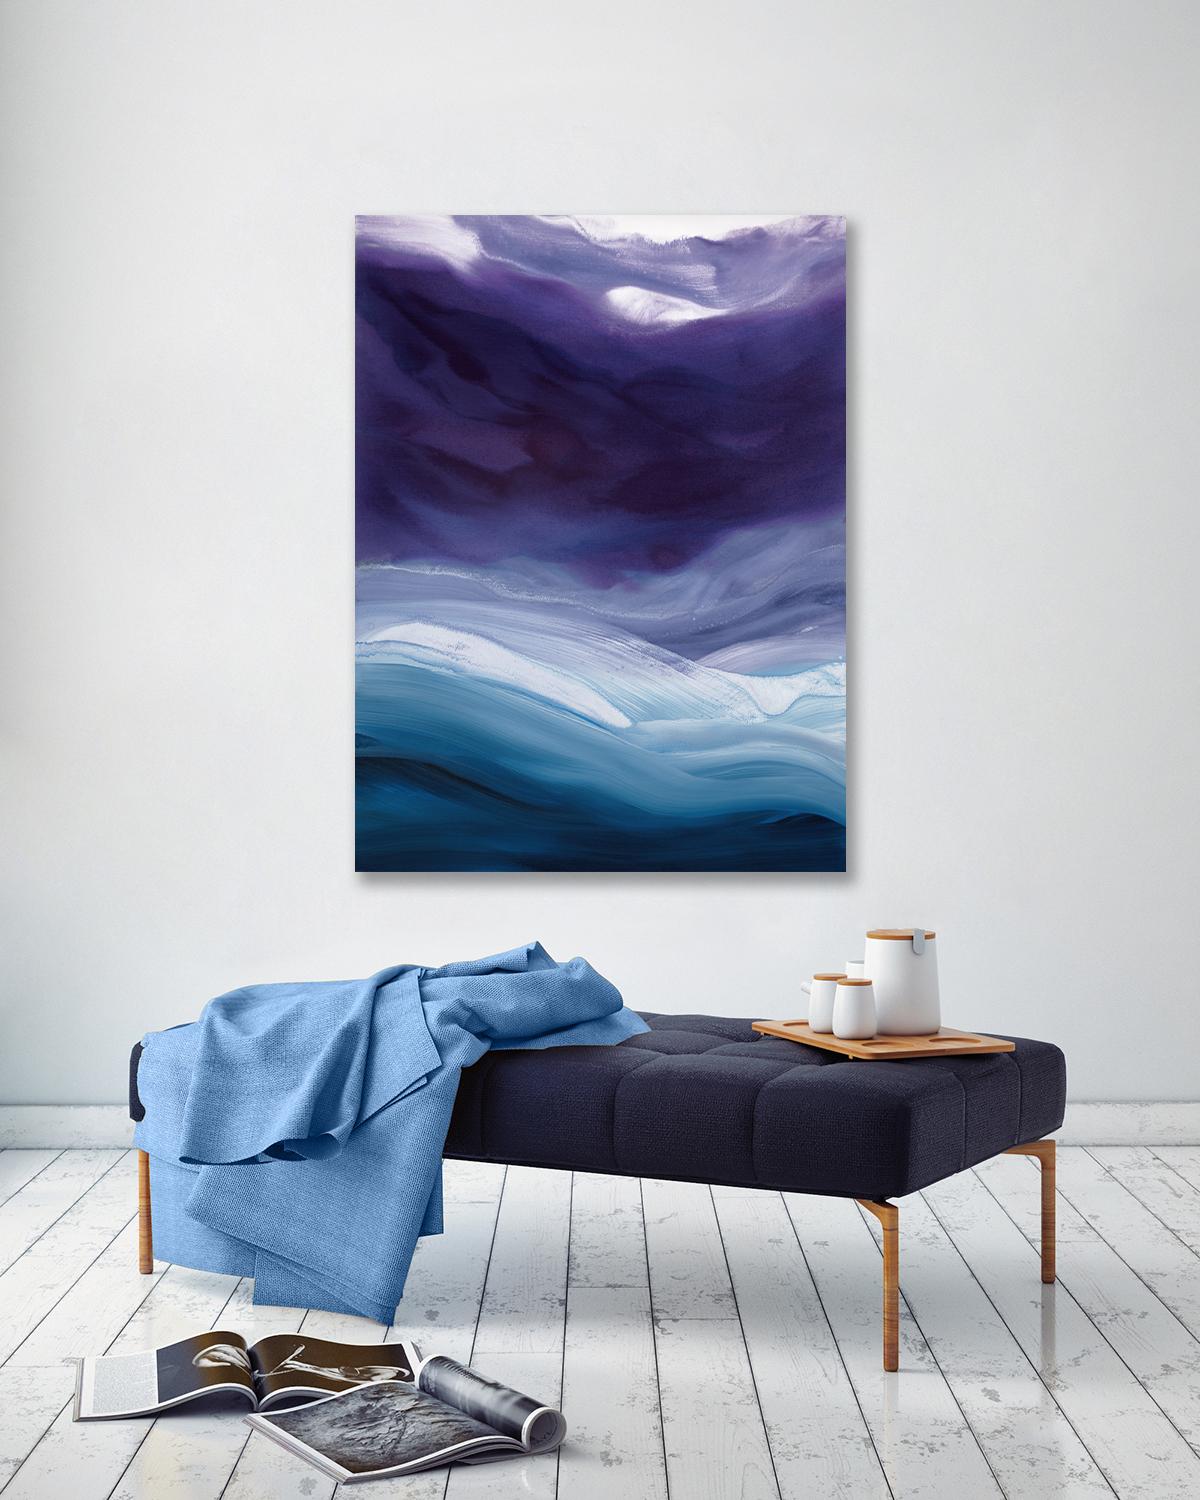 water, wave, sea, ocean, sky, teal, purple, amethyst, droplets, statement, movement, blue and white, drip, influenced by: Pat Steir, contemporary, mimimalism

ABOUT TEODORA GUERERRA

BIOGRAPHY
Teodora Guererra received her Bachelor of Arts in Art